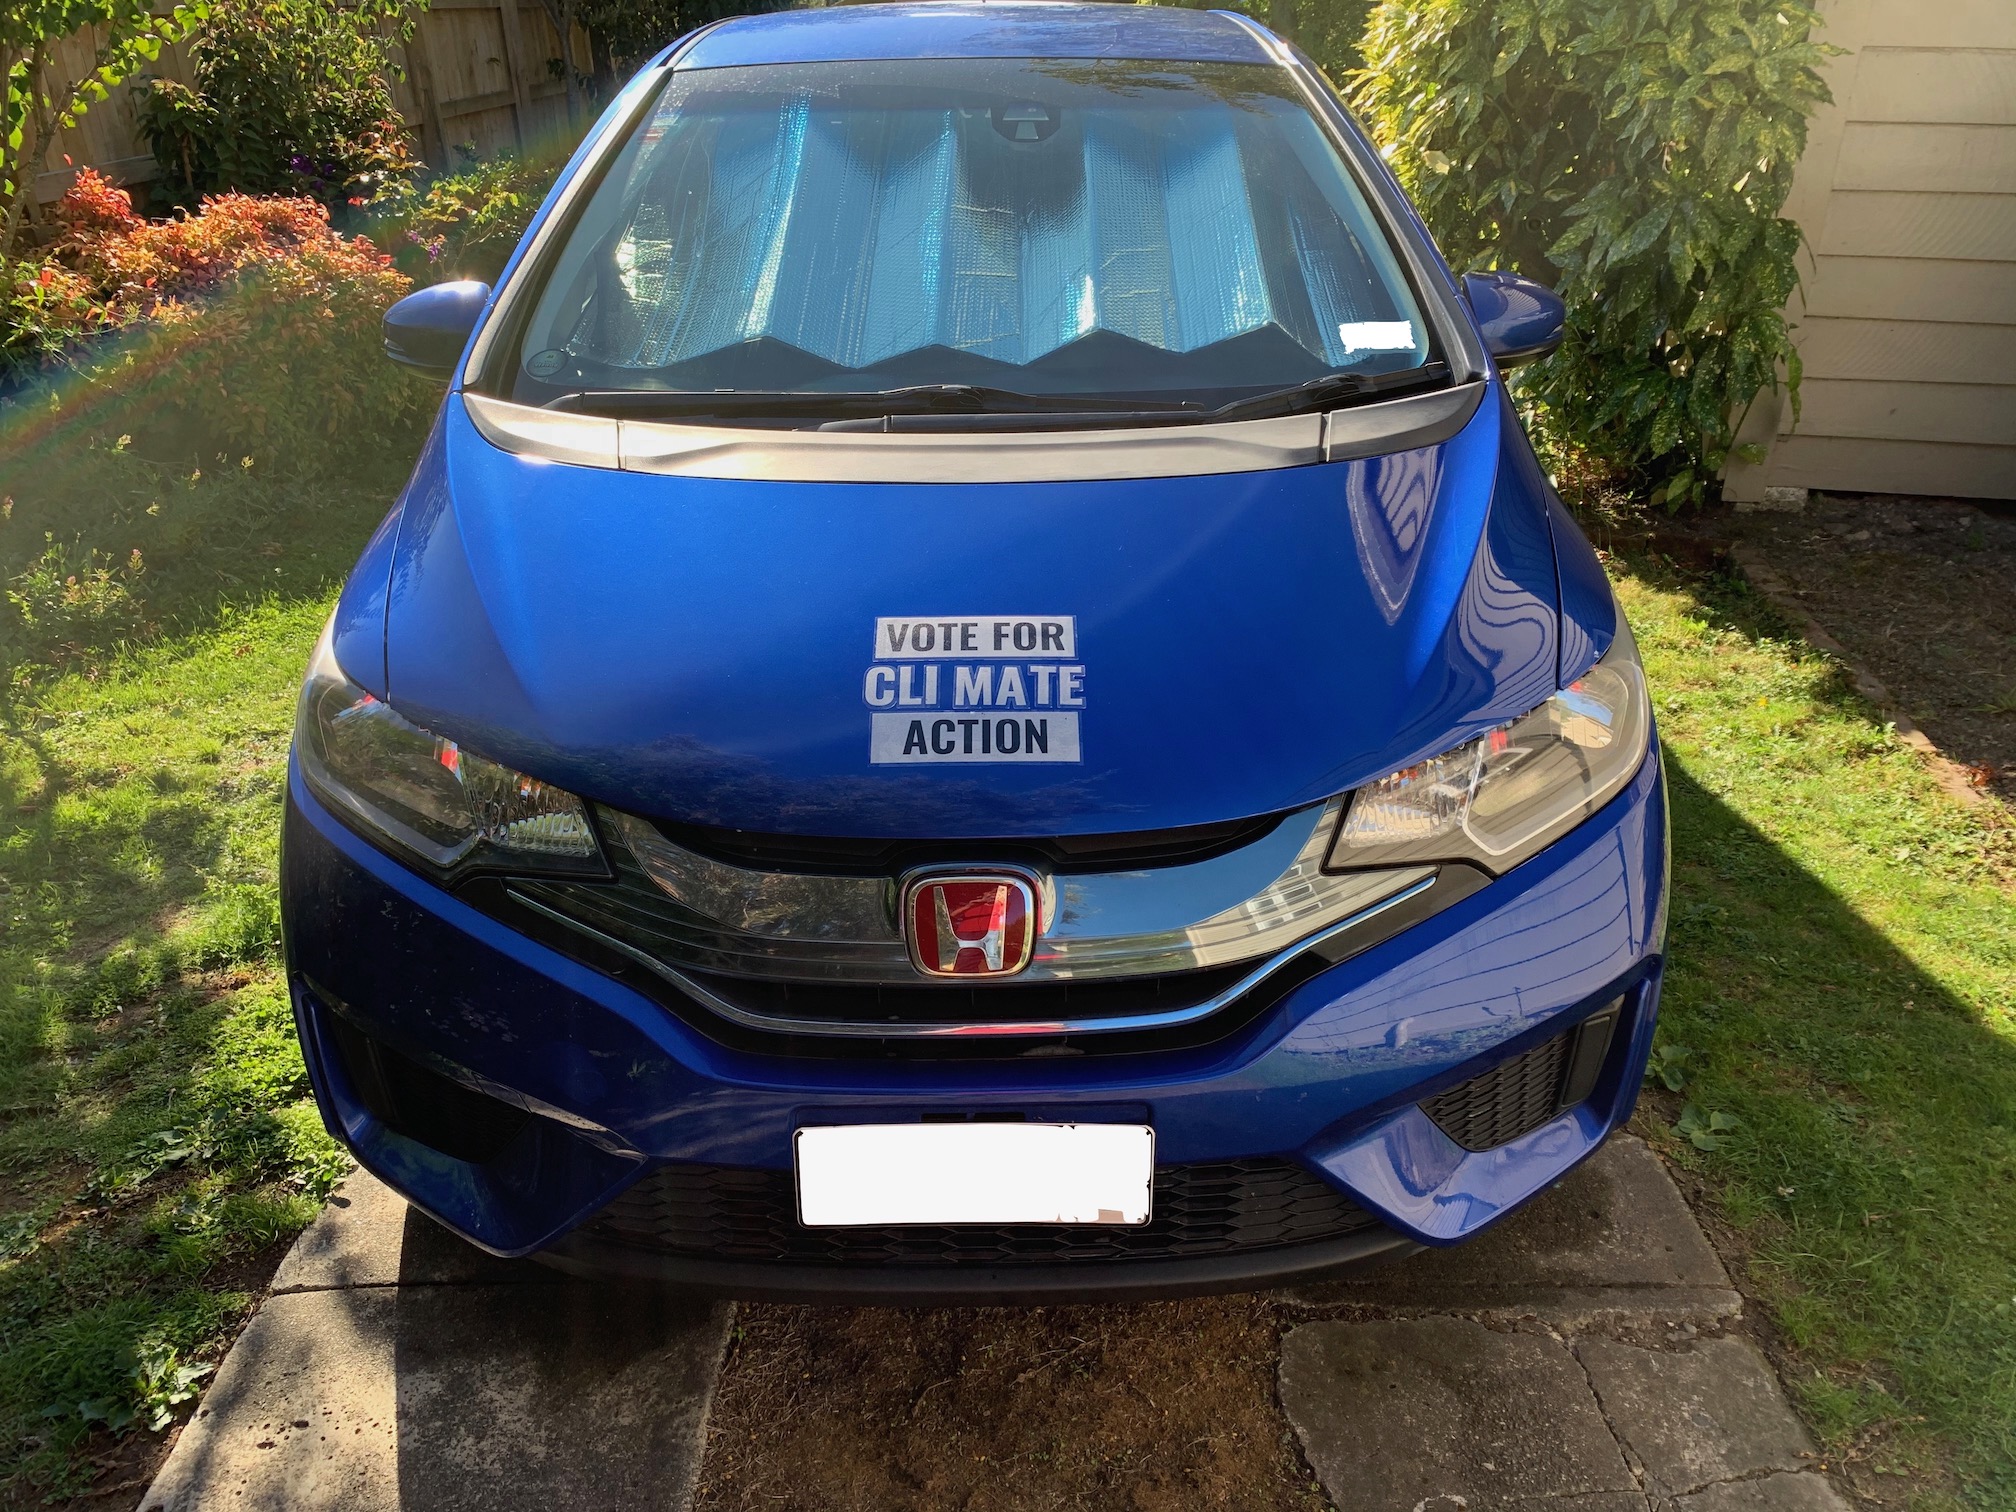 A big sticker on the front of a blue car saying "VOTE CLIMATE ACTION".